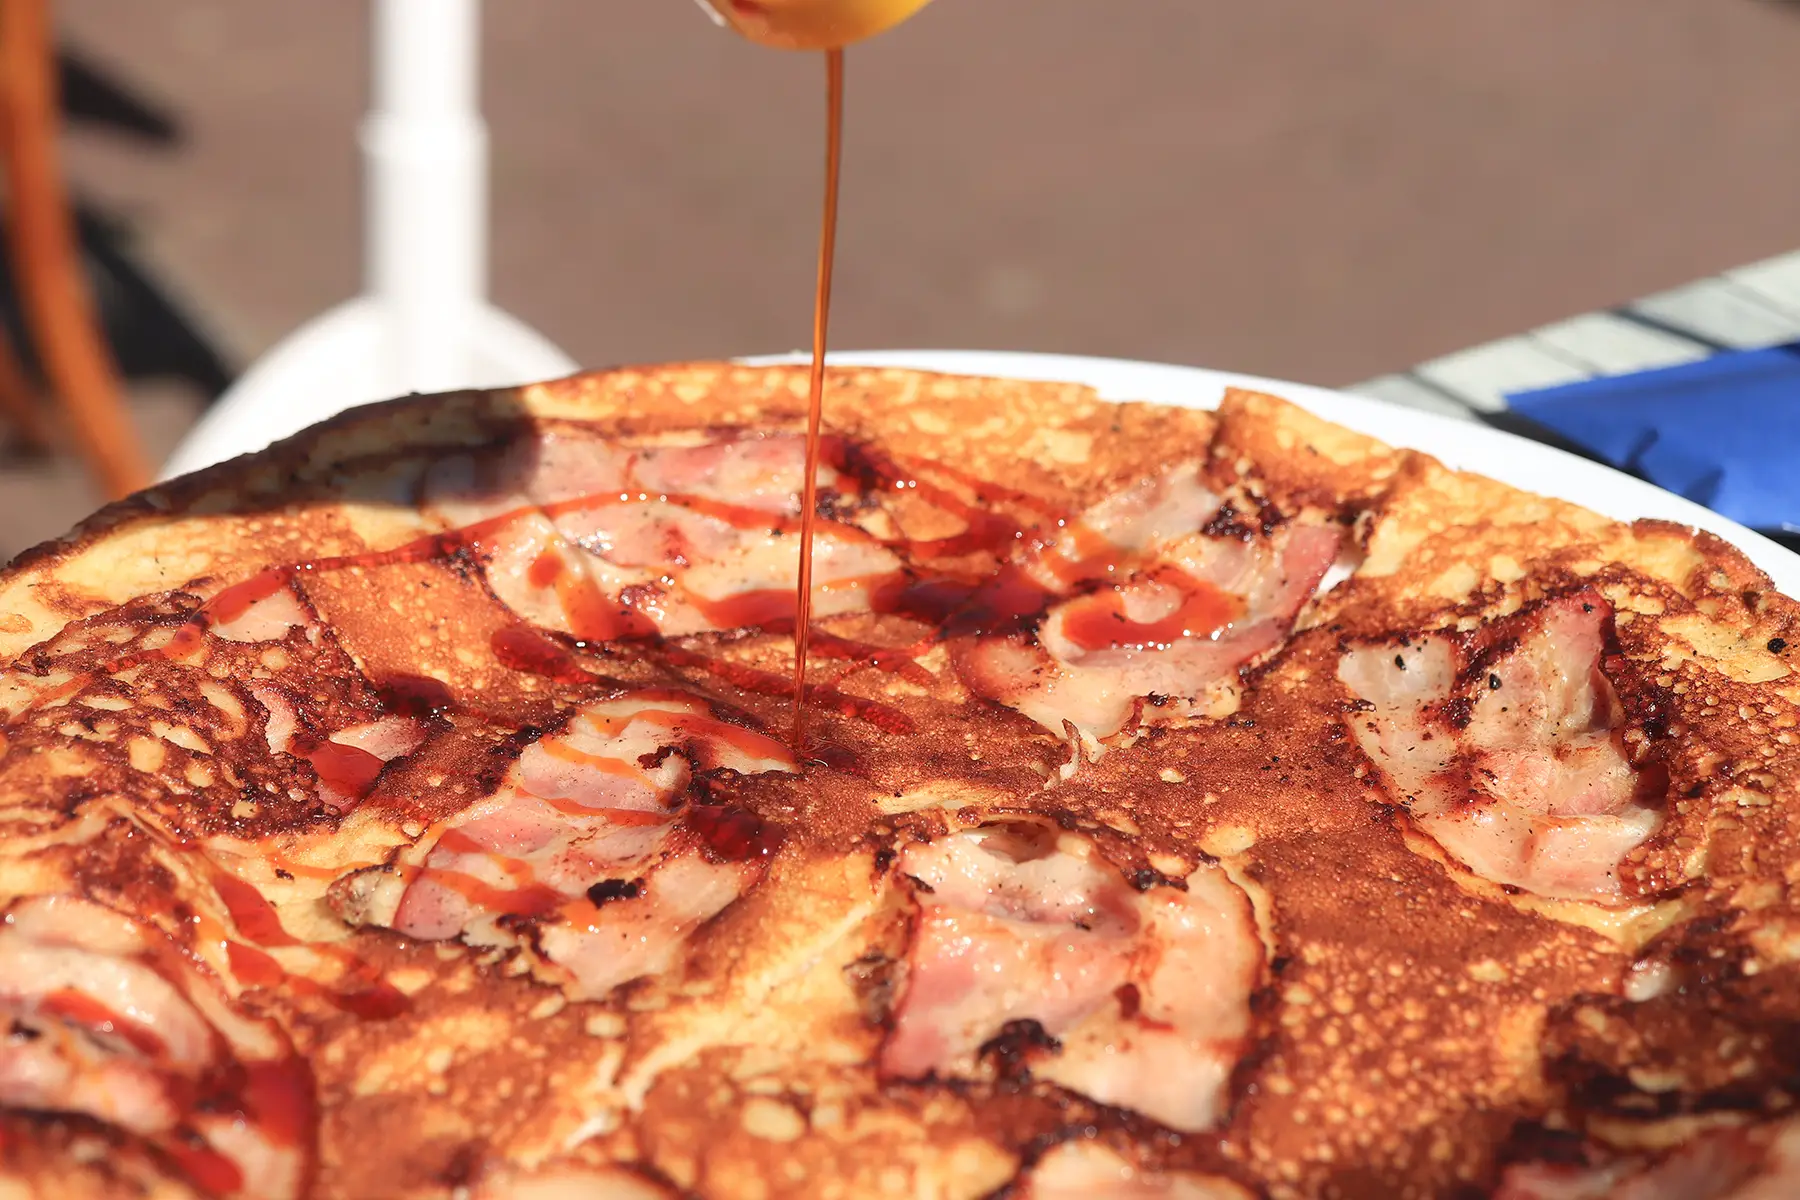 Dutch pancake with bacon and syrup